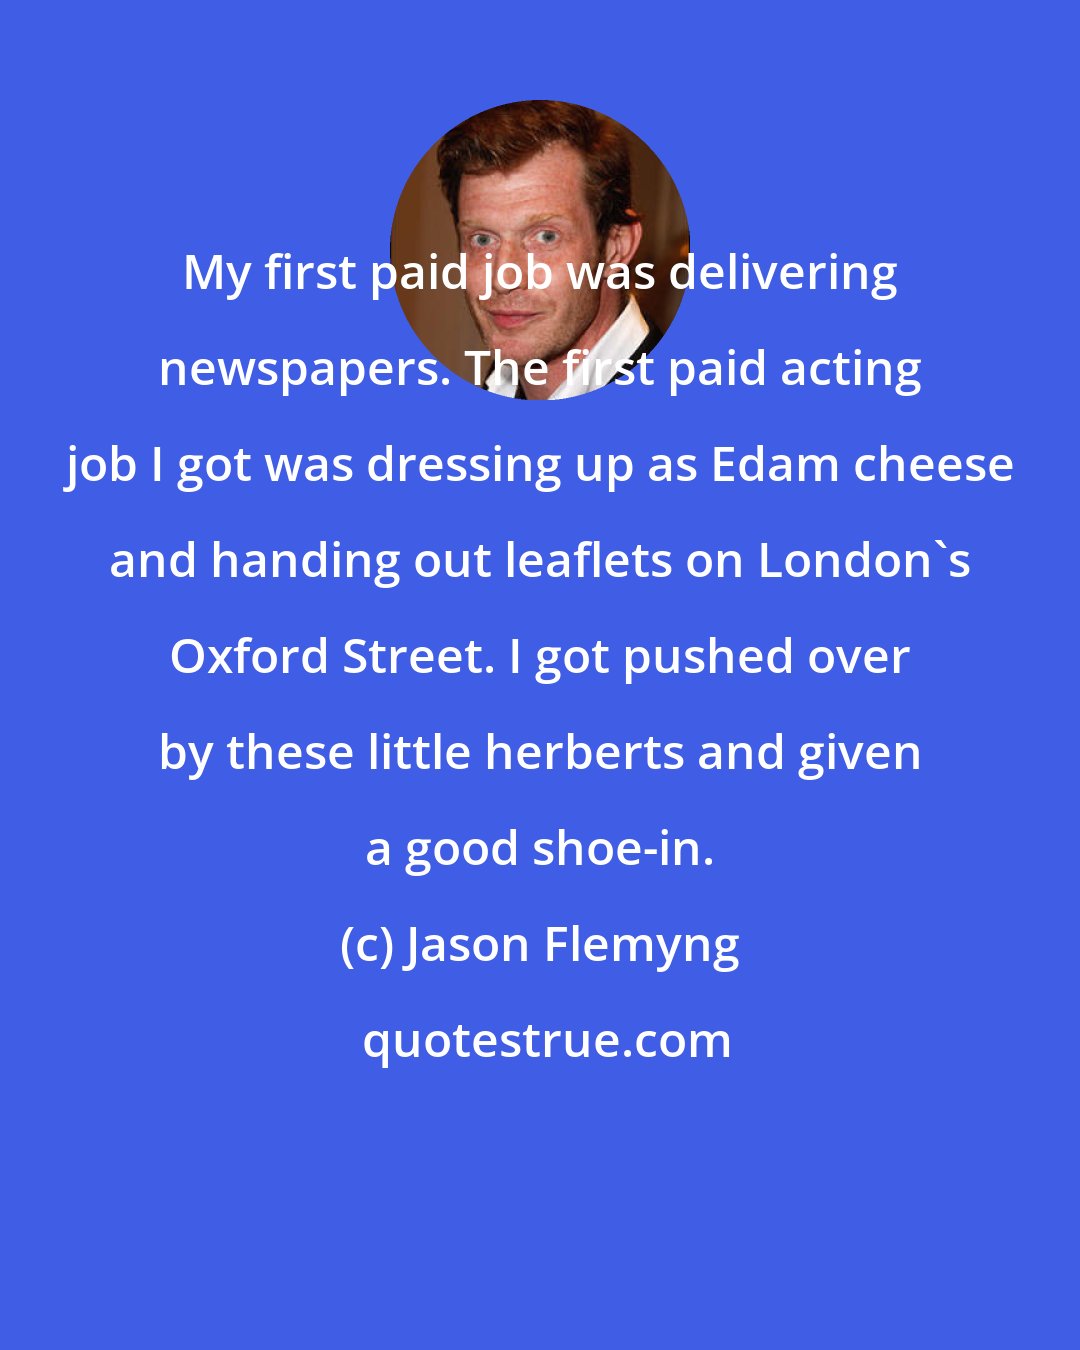 Jason Flemyng: My first paid job was delivering newspapers. The first paid acting job I got was dressing up as Edam cheese and handing out leaflets on London's Oxford Street. I got pushed over by these little herberts and given a good shoe-in.